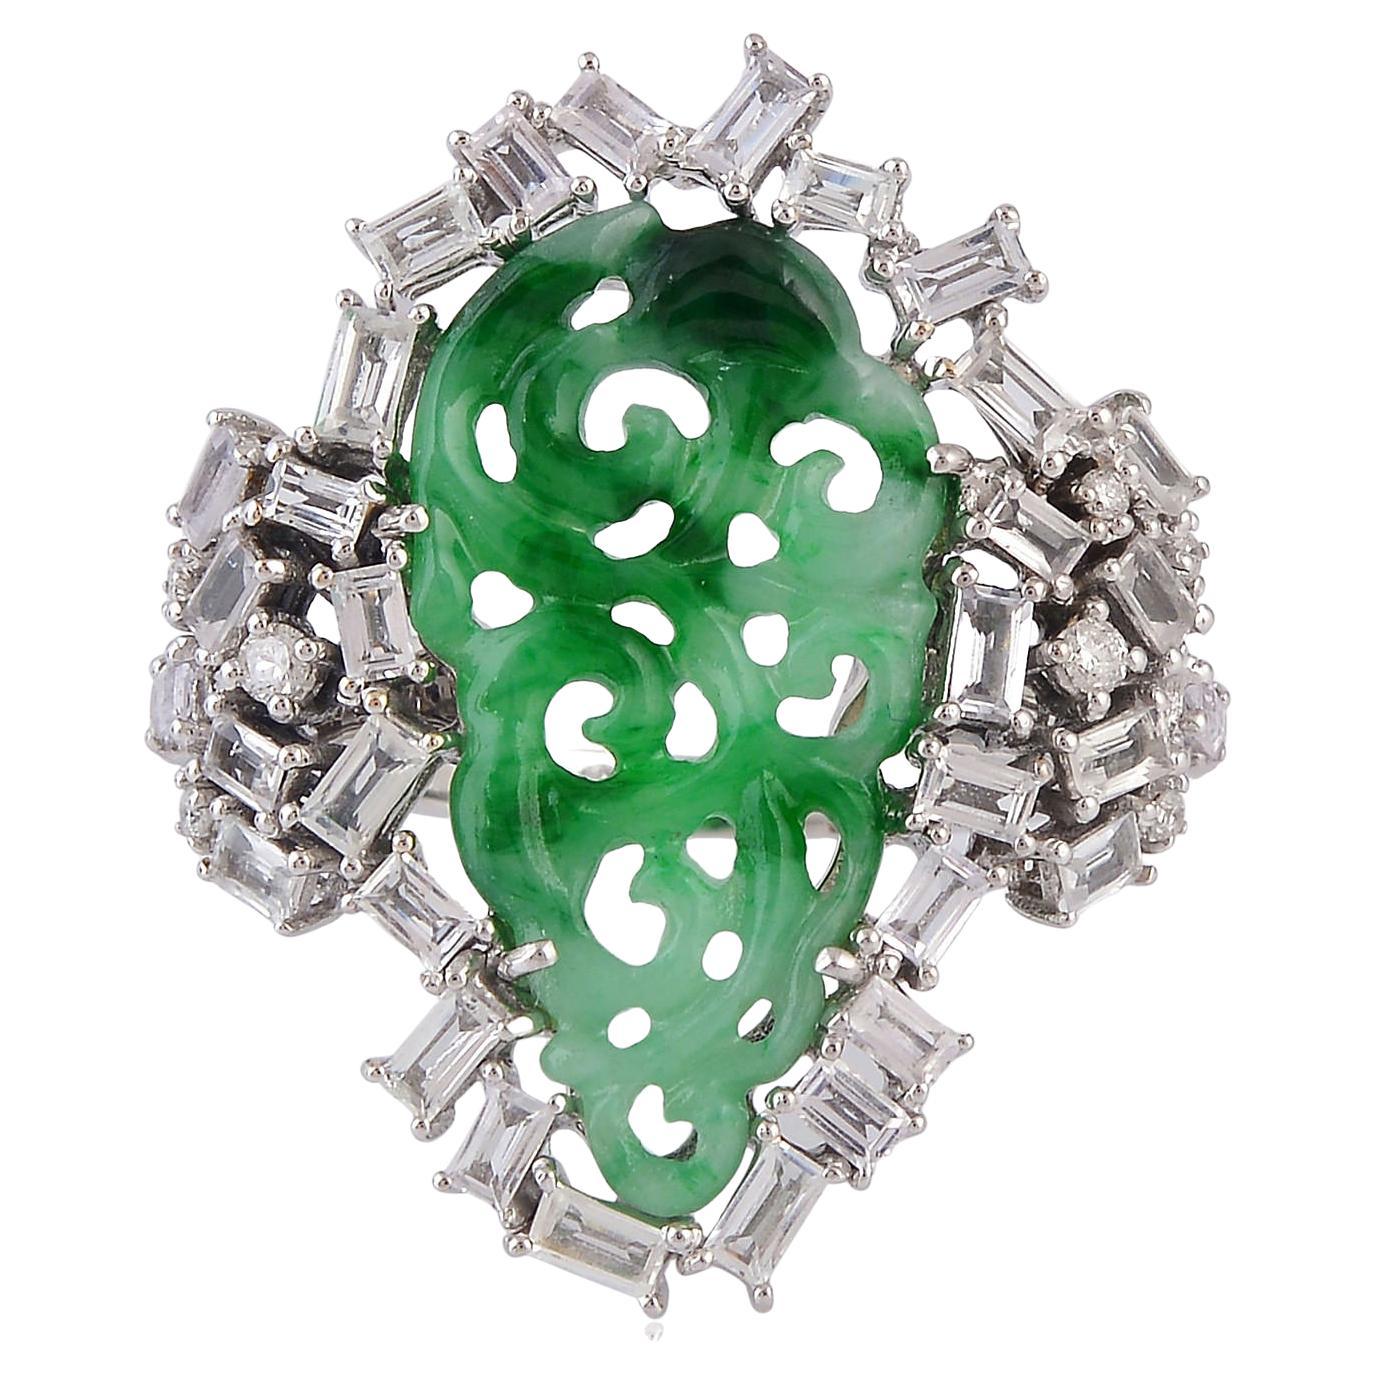 Organic Shaped Carved Jade Cocktail Ring With White Sapphire